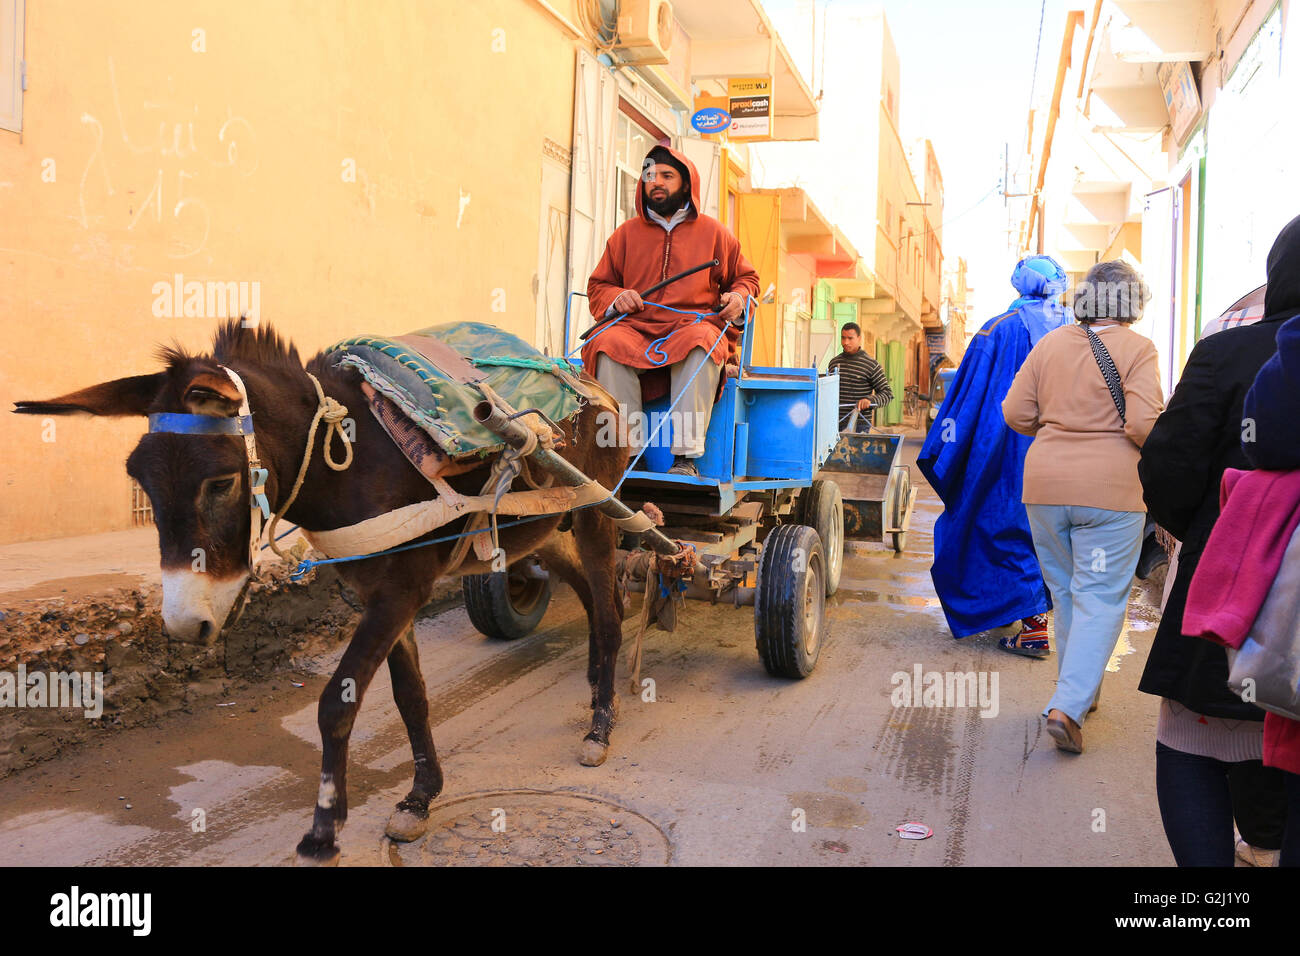 RISSANI, MOROCCO: Narrow street in Rissani with donkey cart and colorful clothes people in Morocco Stock Photo